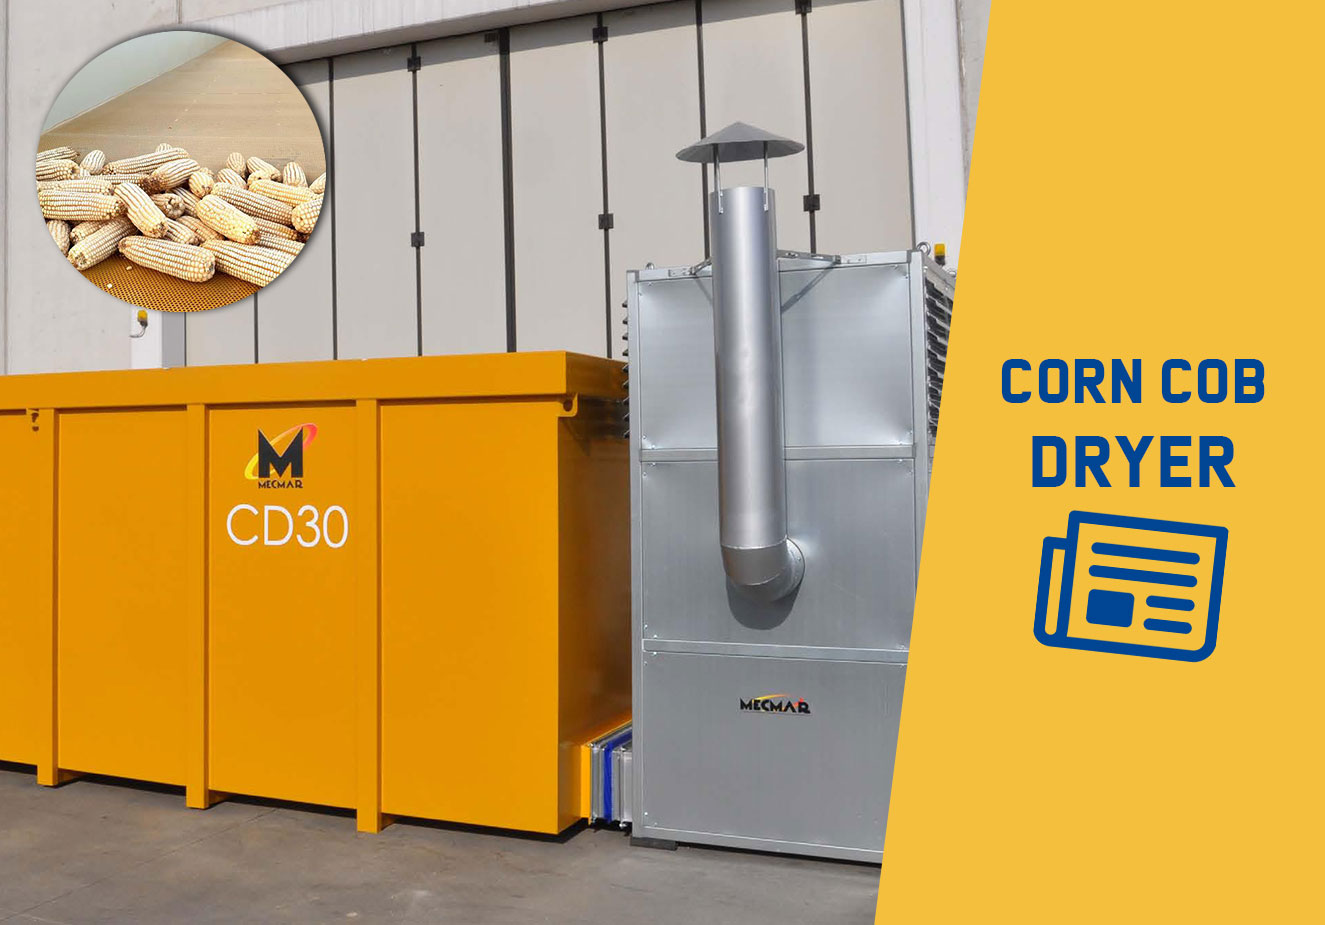 Corn cob dryer: the ideal solution for you corn